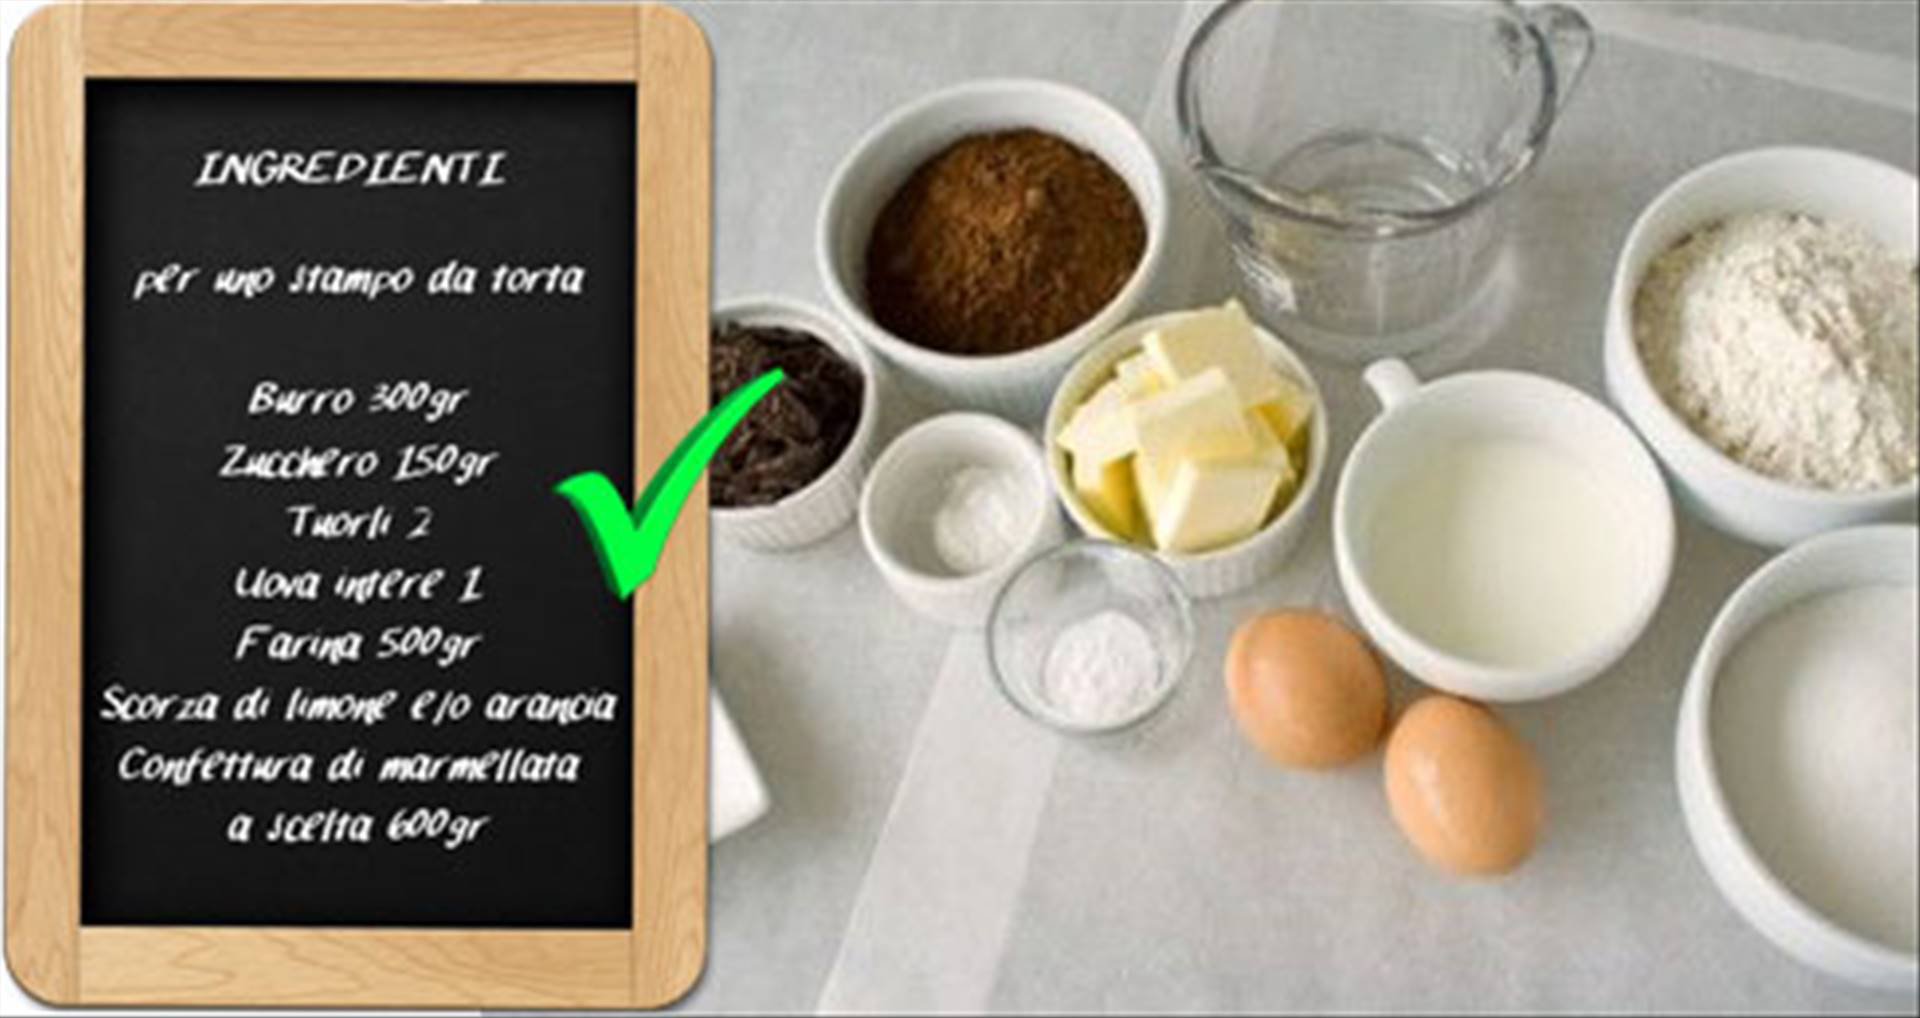 The ingredients of a recipe arr always easy to find. You will find everything in a single place.